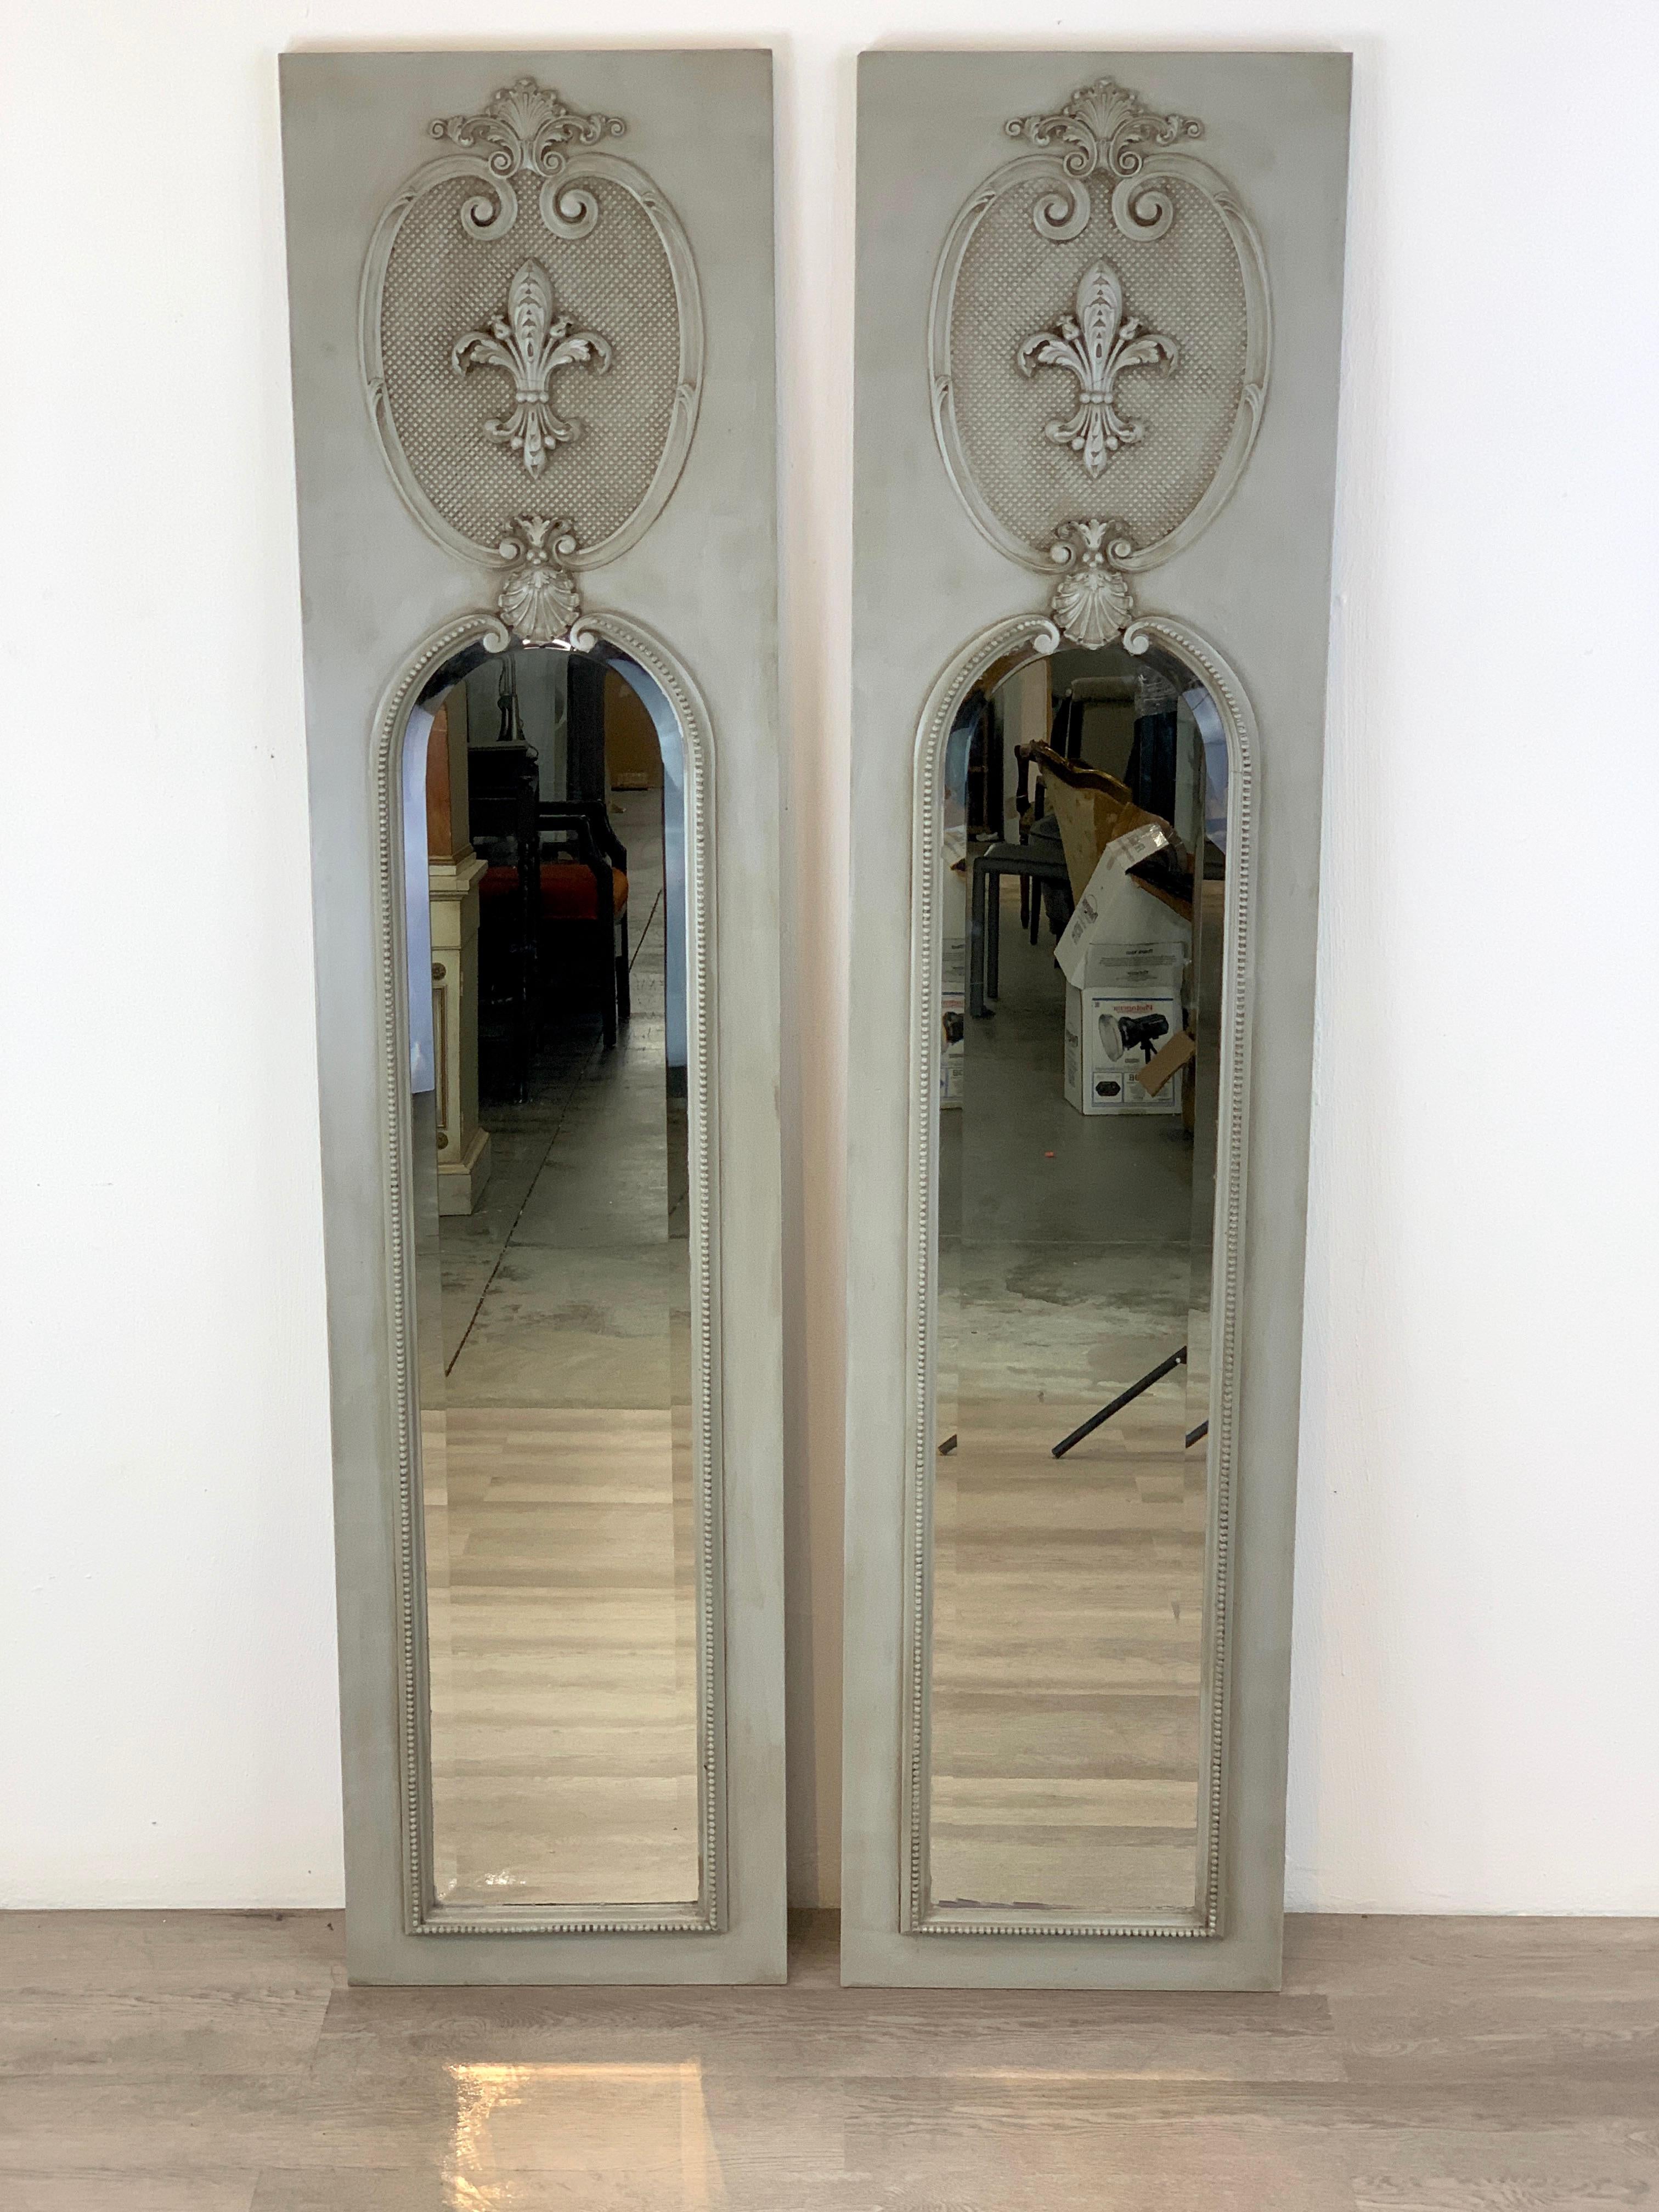 Pair of French grey panted trumeau mirrors, each one with carved fleur de lis cartouche, the lower inset beveled mirror measures 47